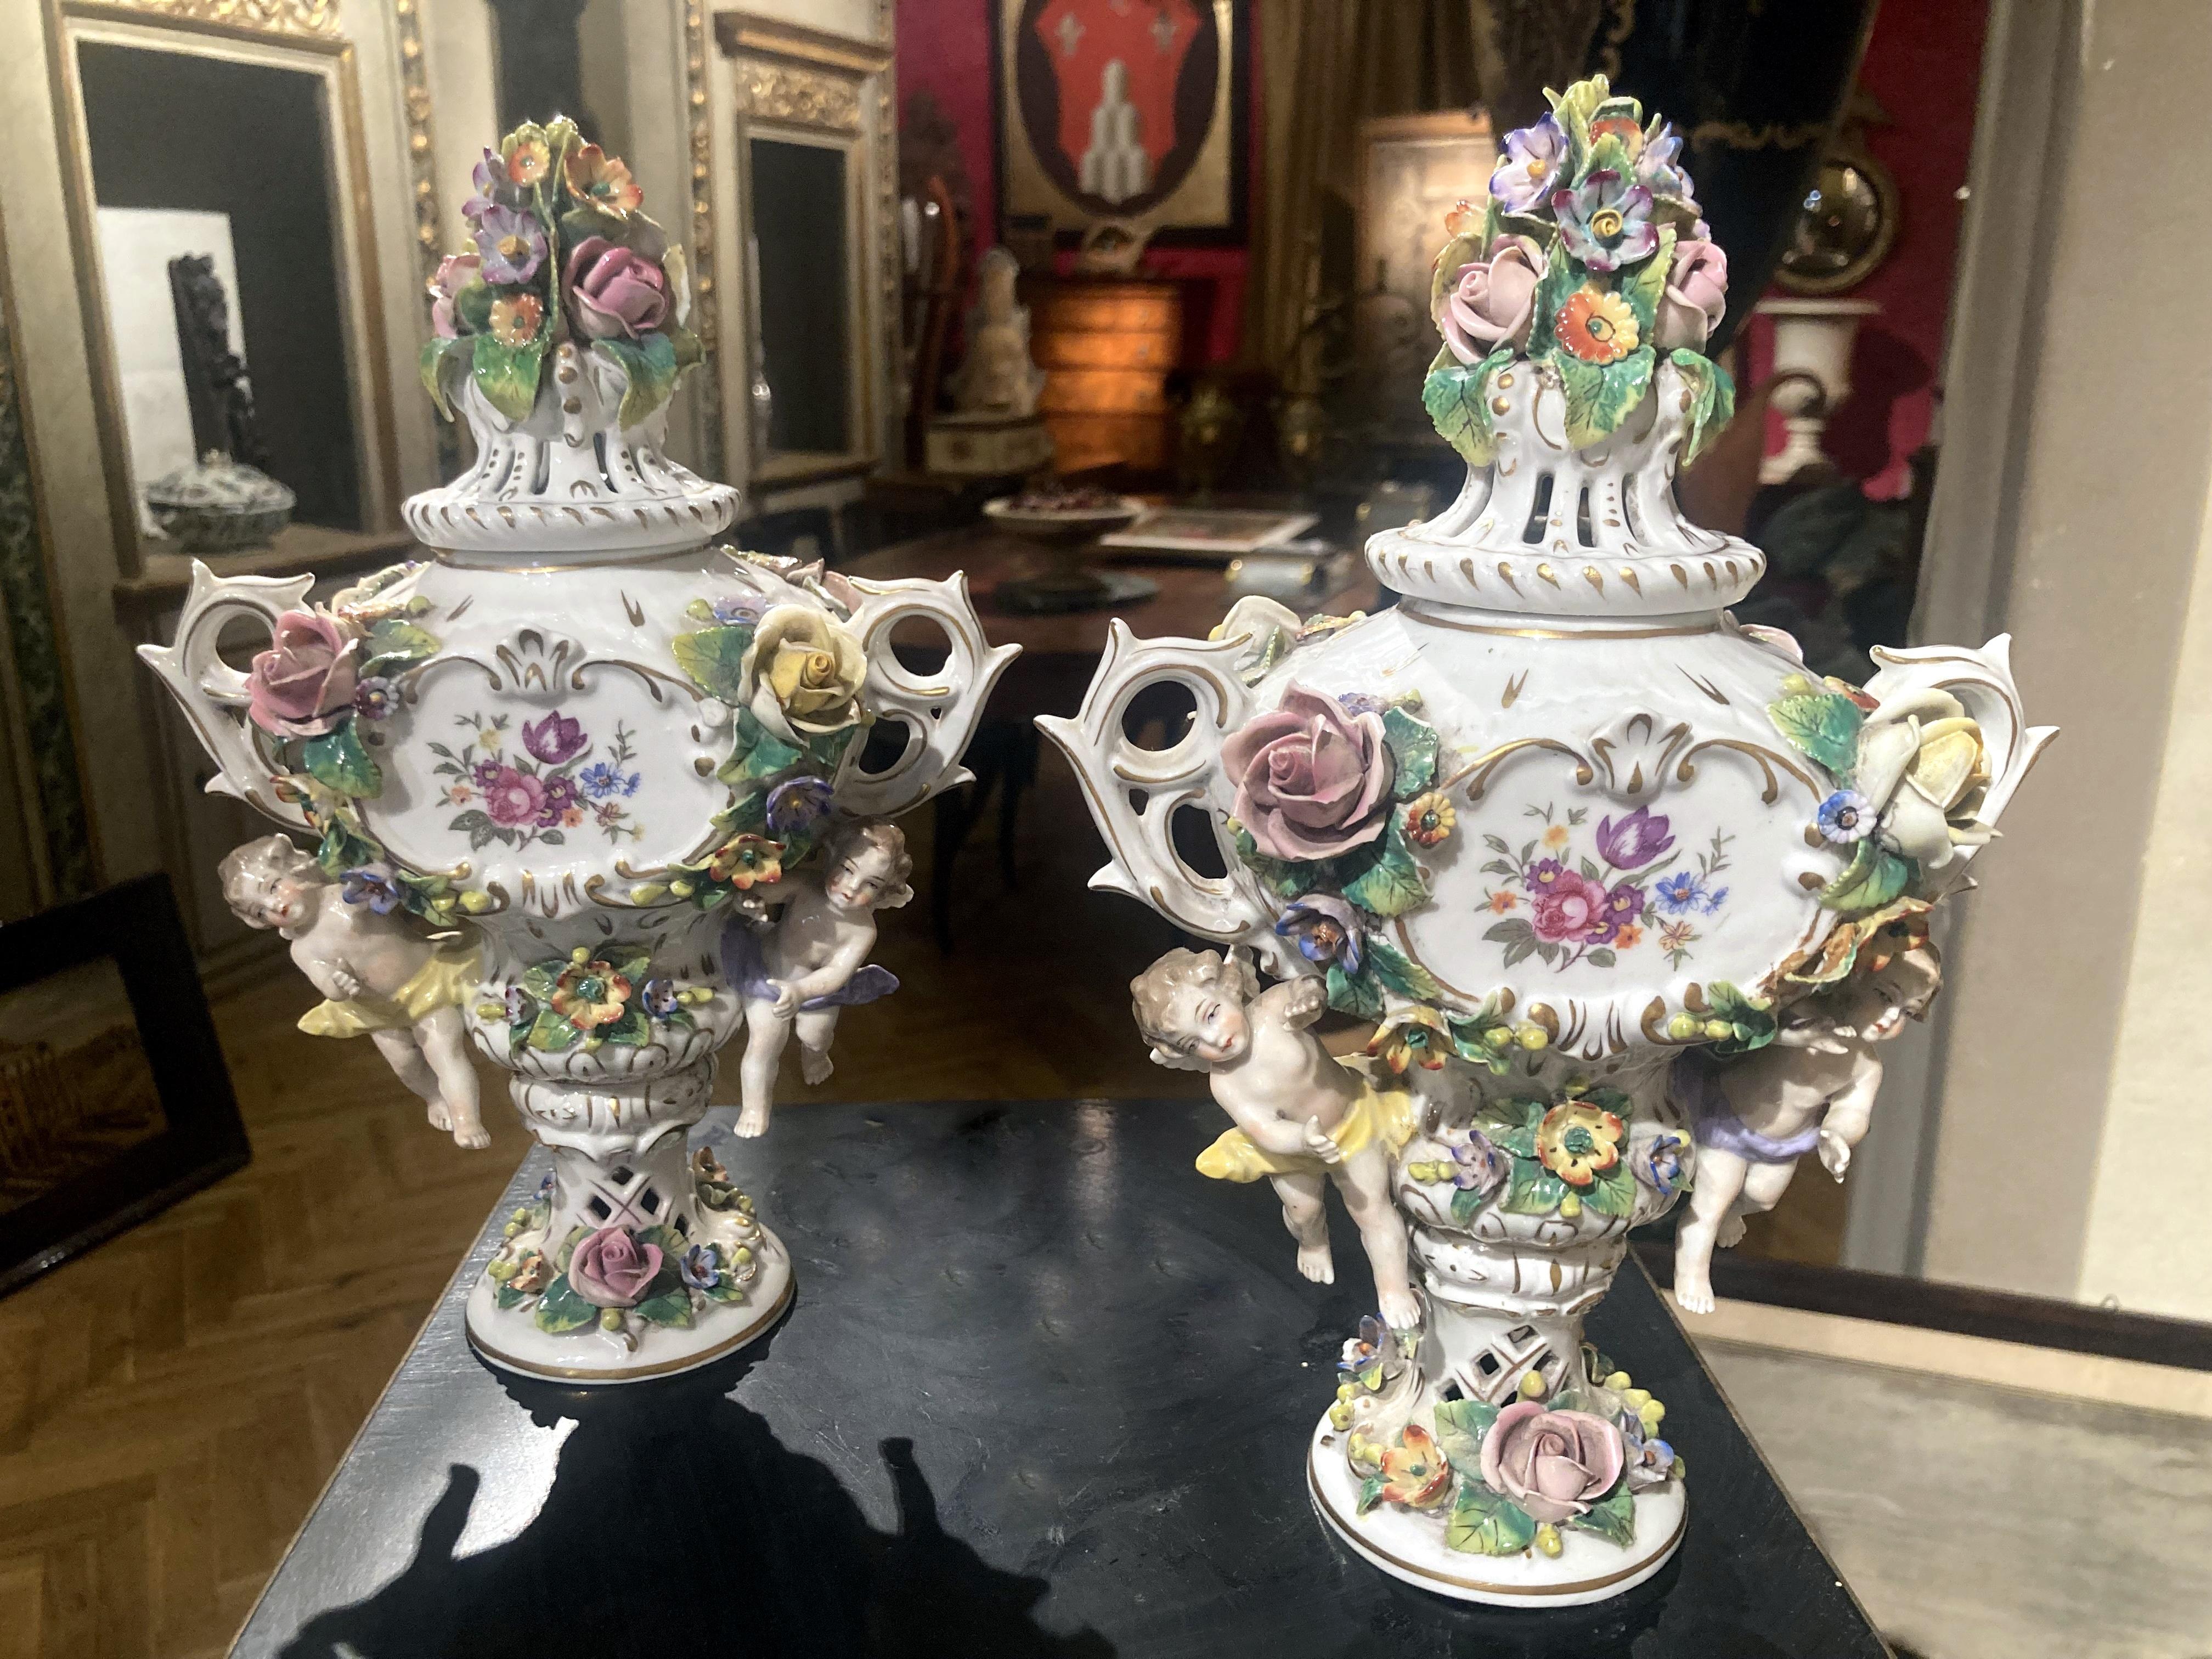 An exquisite pair of early 19th century Italian Capodimonte Rocococ style polychrome porcelain incense burners in the form of urn shaped vases with two handles and pierced lids. 
The body is centered on both sides by a flower garland painted with